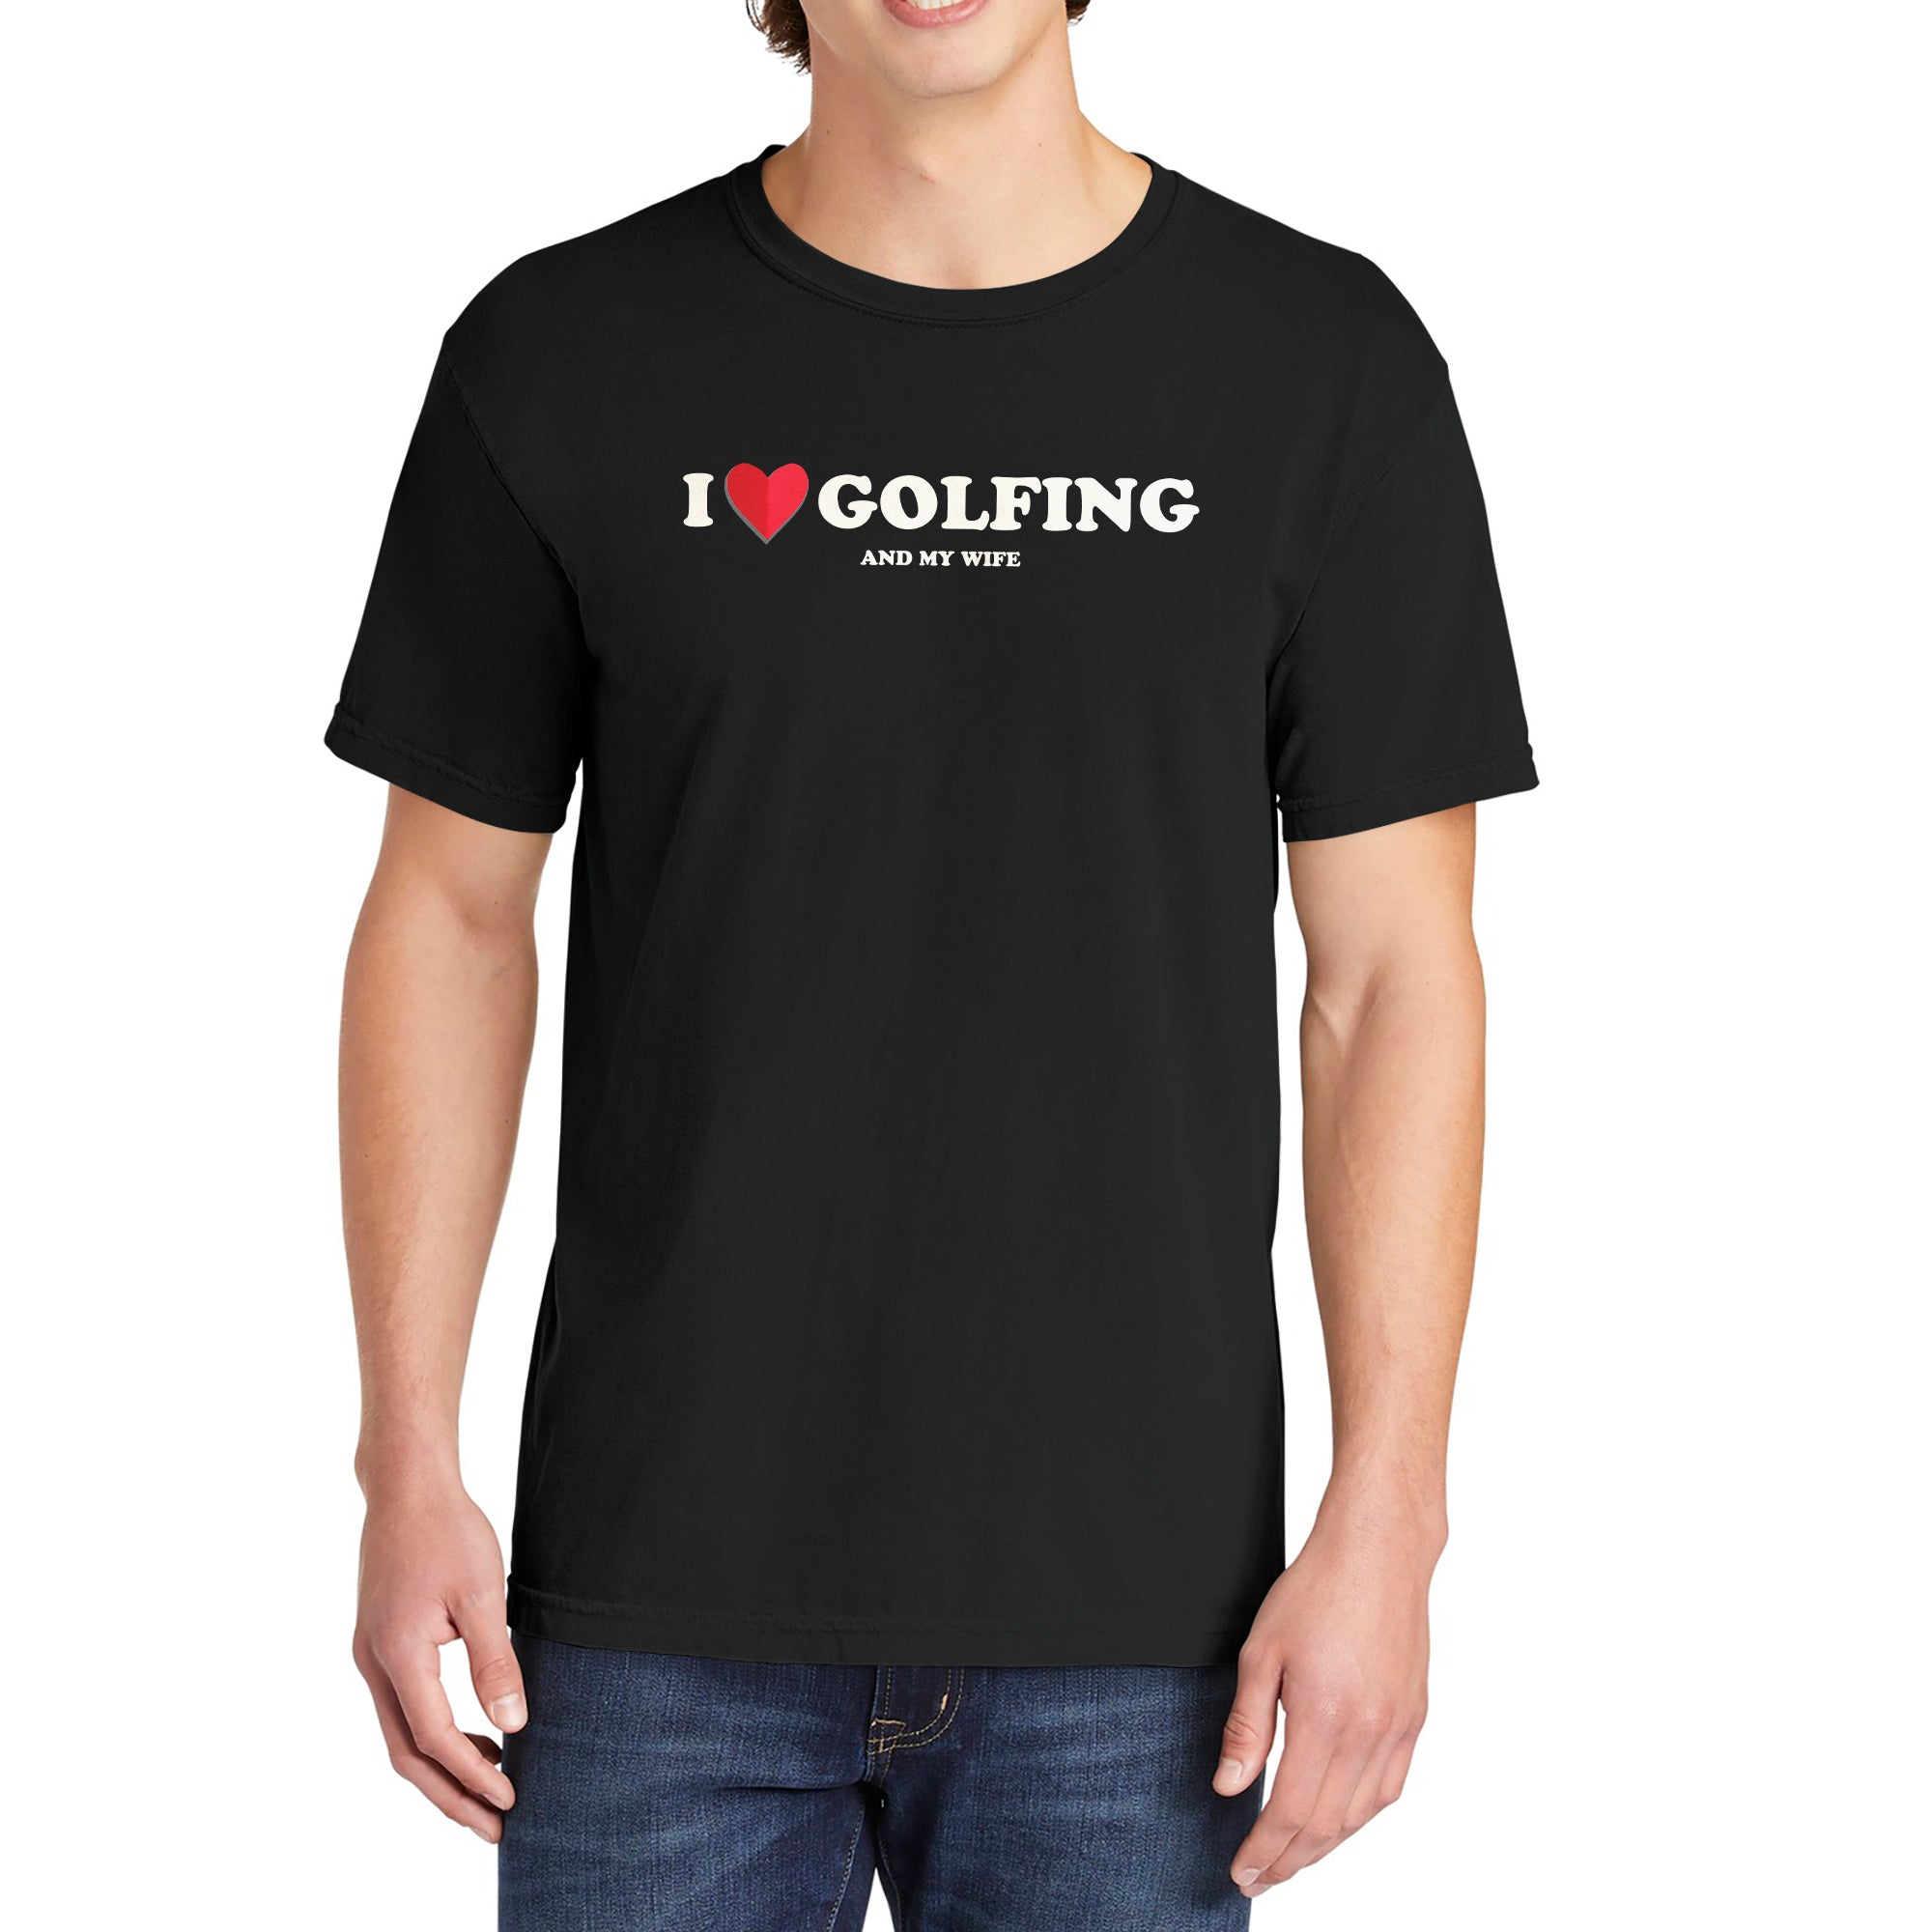 I Heart Golfing Garment-Dyed Tee - Stories You Can Wear